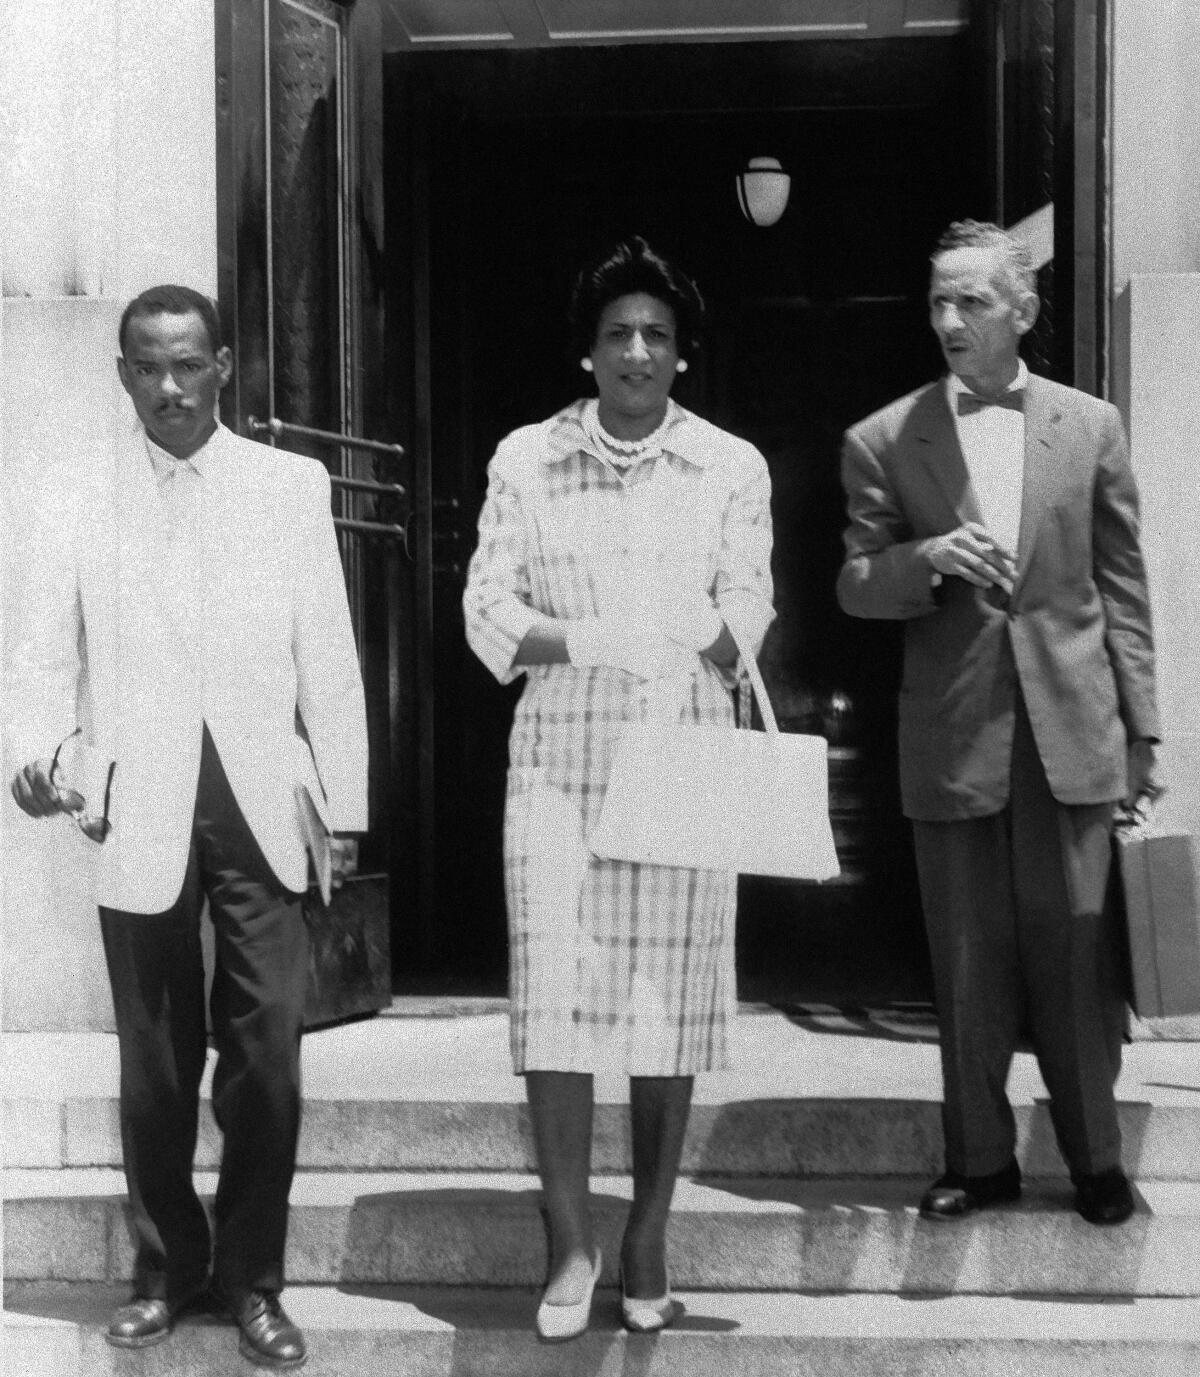 Constance Baker Motley, center, and another lawyer escort their client James Meredith, left, from a courthouse 